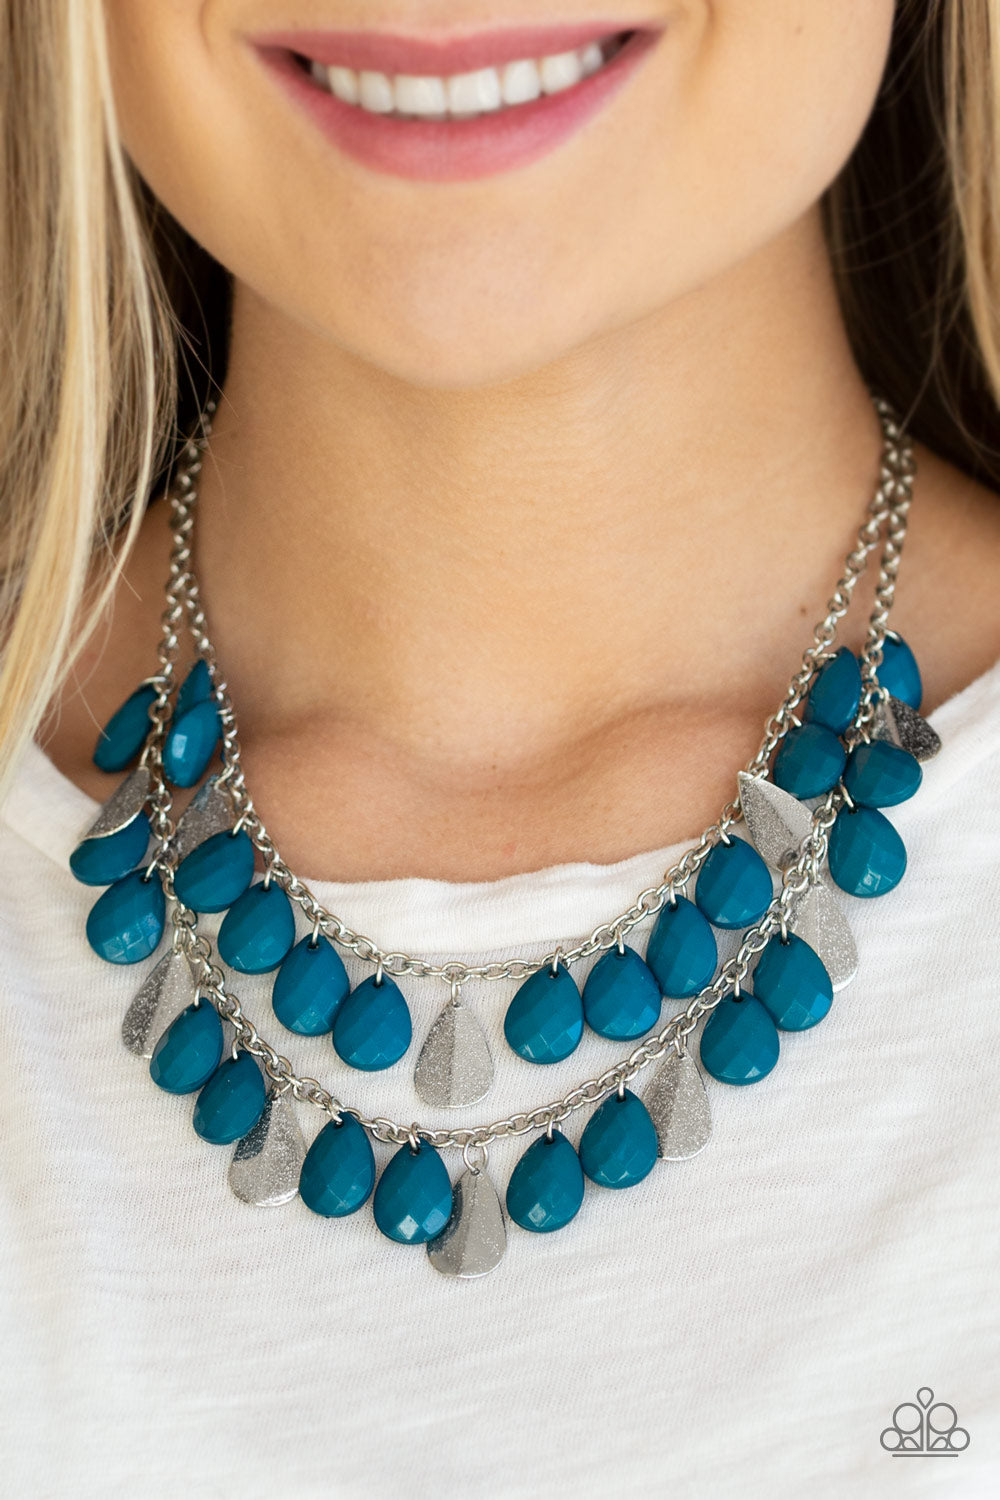 LIFE OF THE FIESTA - BLUE AND SILVER FRINGE NECKLACE